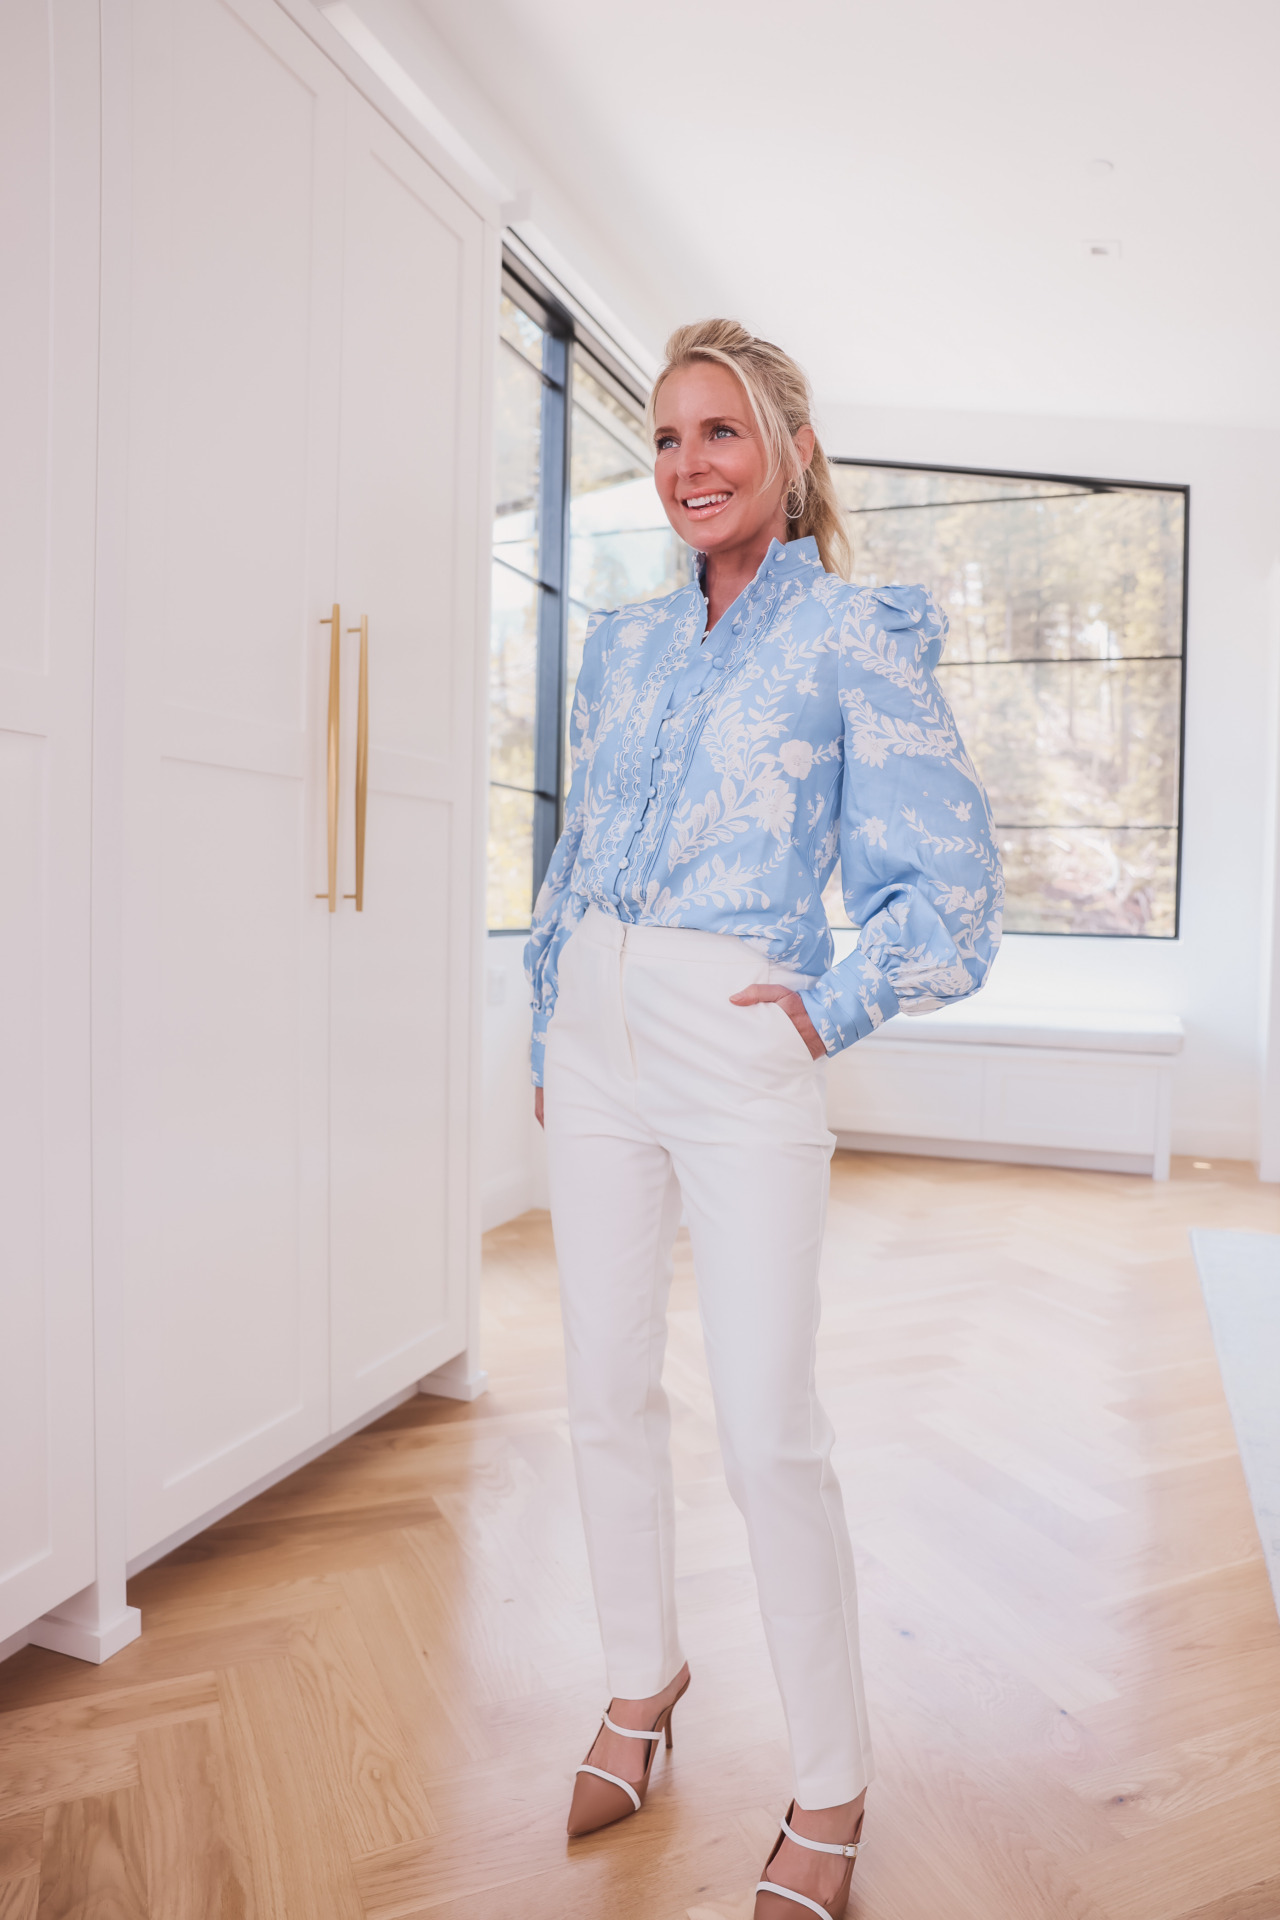 Powder Blue Top with white jeans